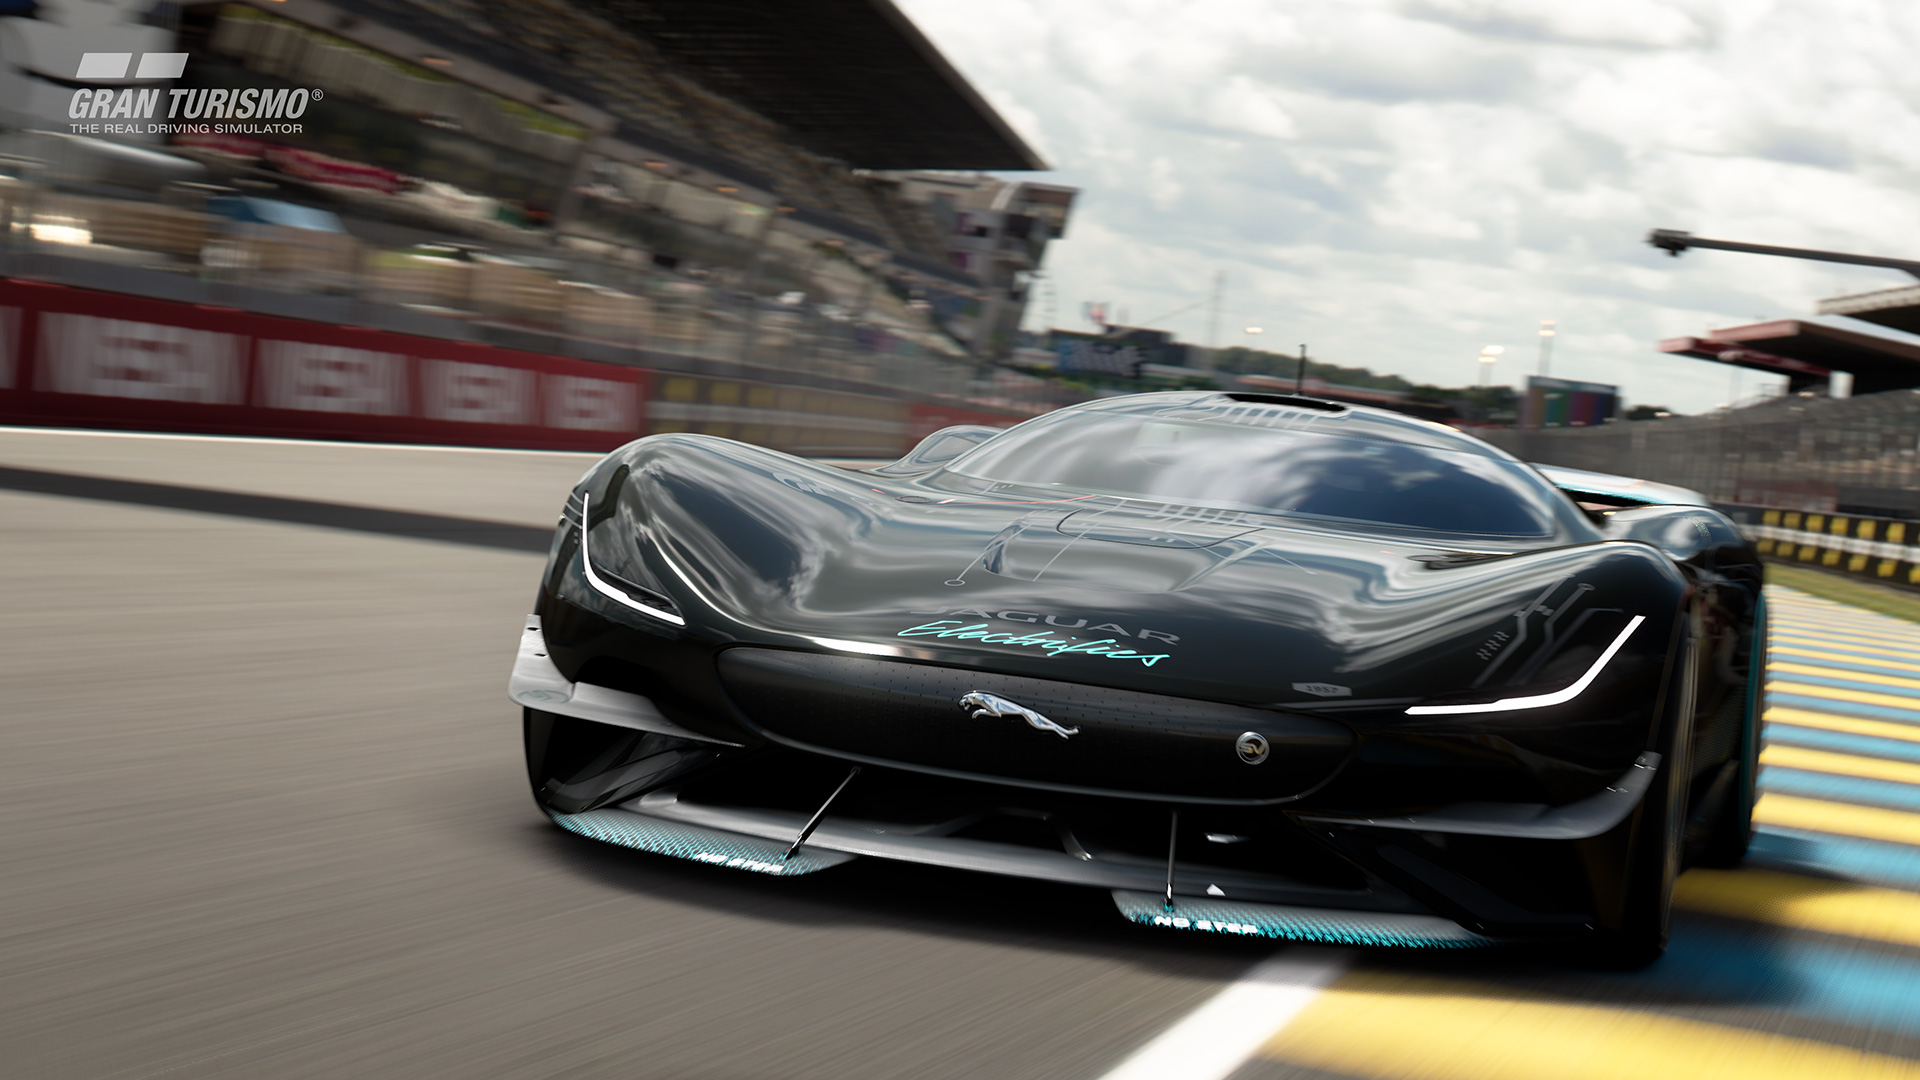 Gran Turismo 7: this is the Jaguar Vision GT Roadster